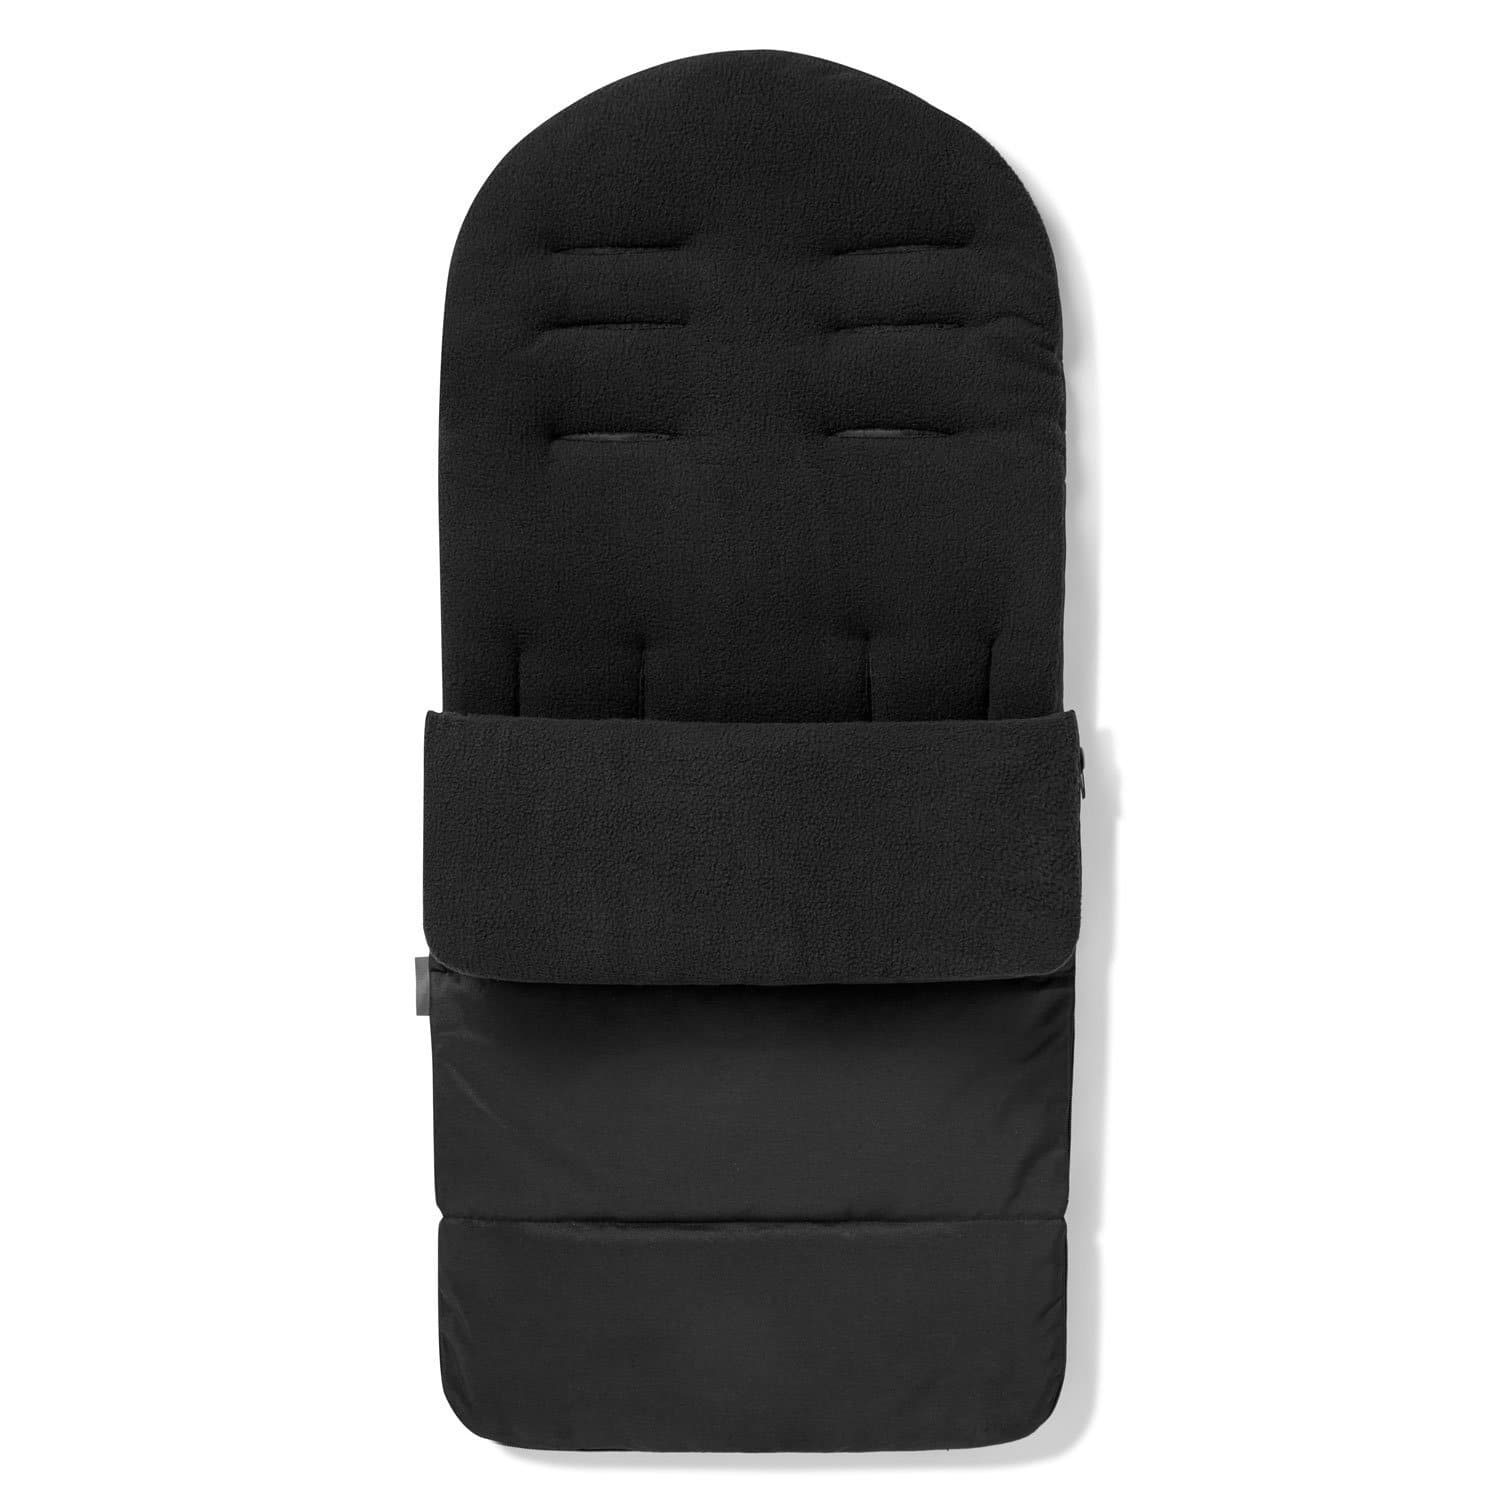 Premium Footmuff / Cosy Toes Compatible with Diono - Black Jack / Fits All Models | For Your Little One